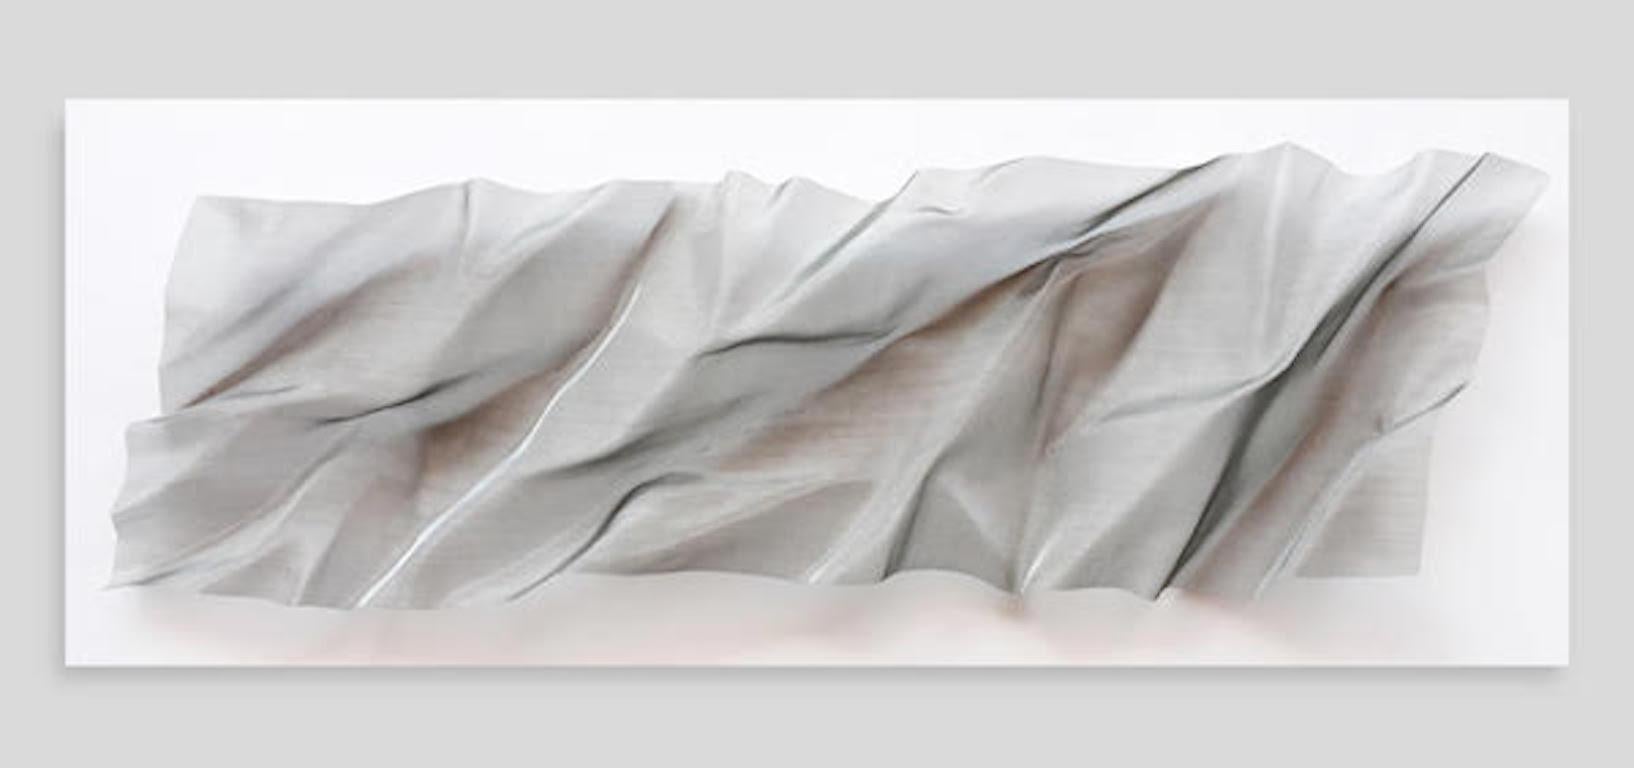 Mareo Rodriguez Abstract Sculpture - Mantel (Steel)